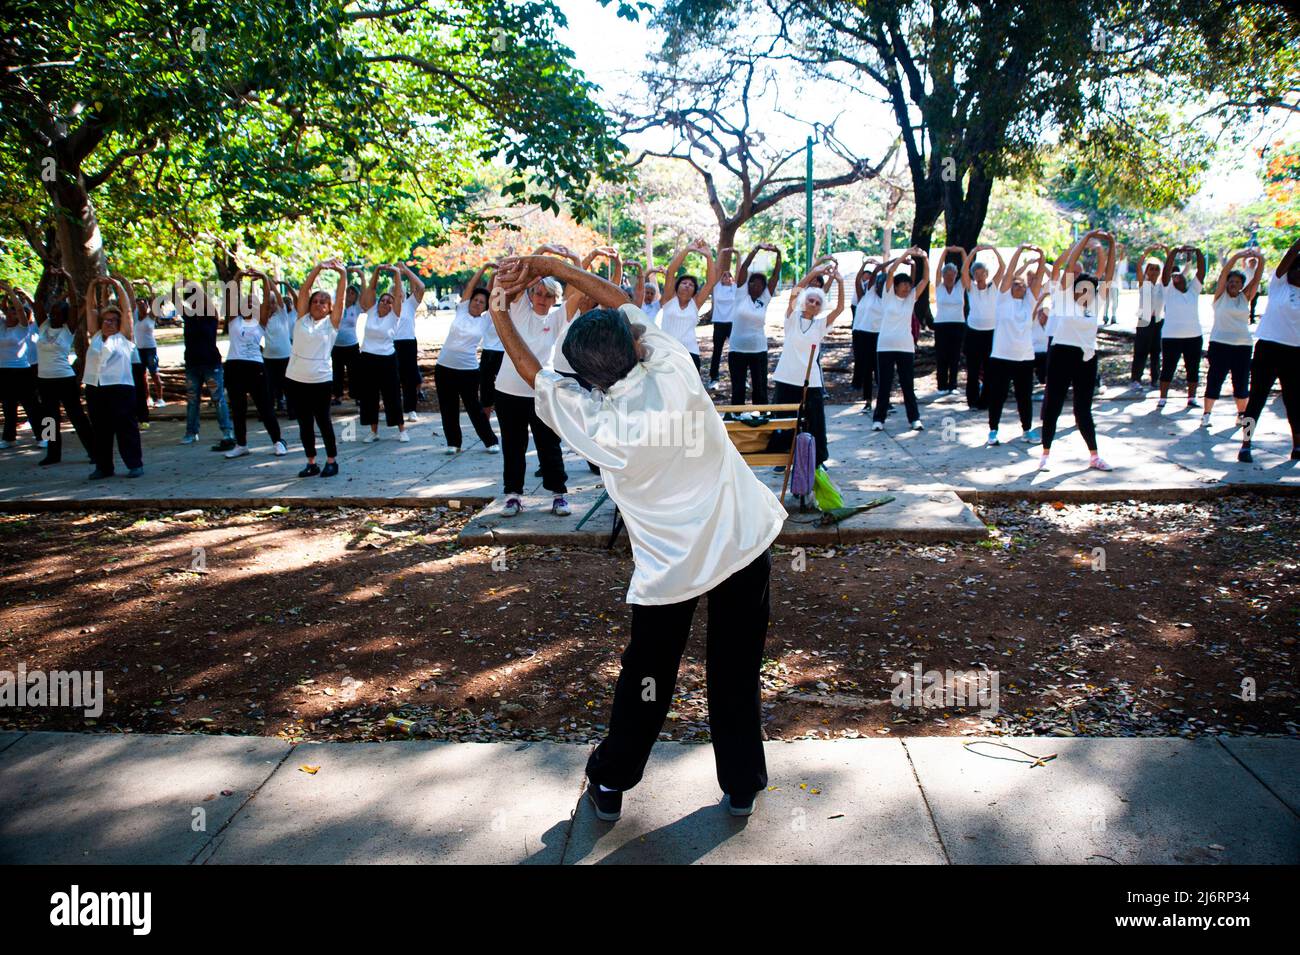 Older Cuban woman doing group exercises in a park in the Vedado section of Havana, Cuba. Stock Photo